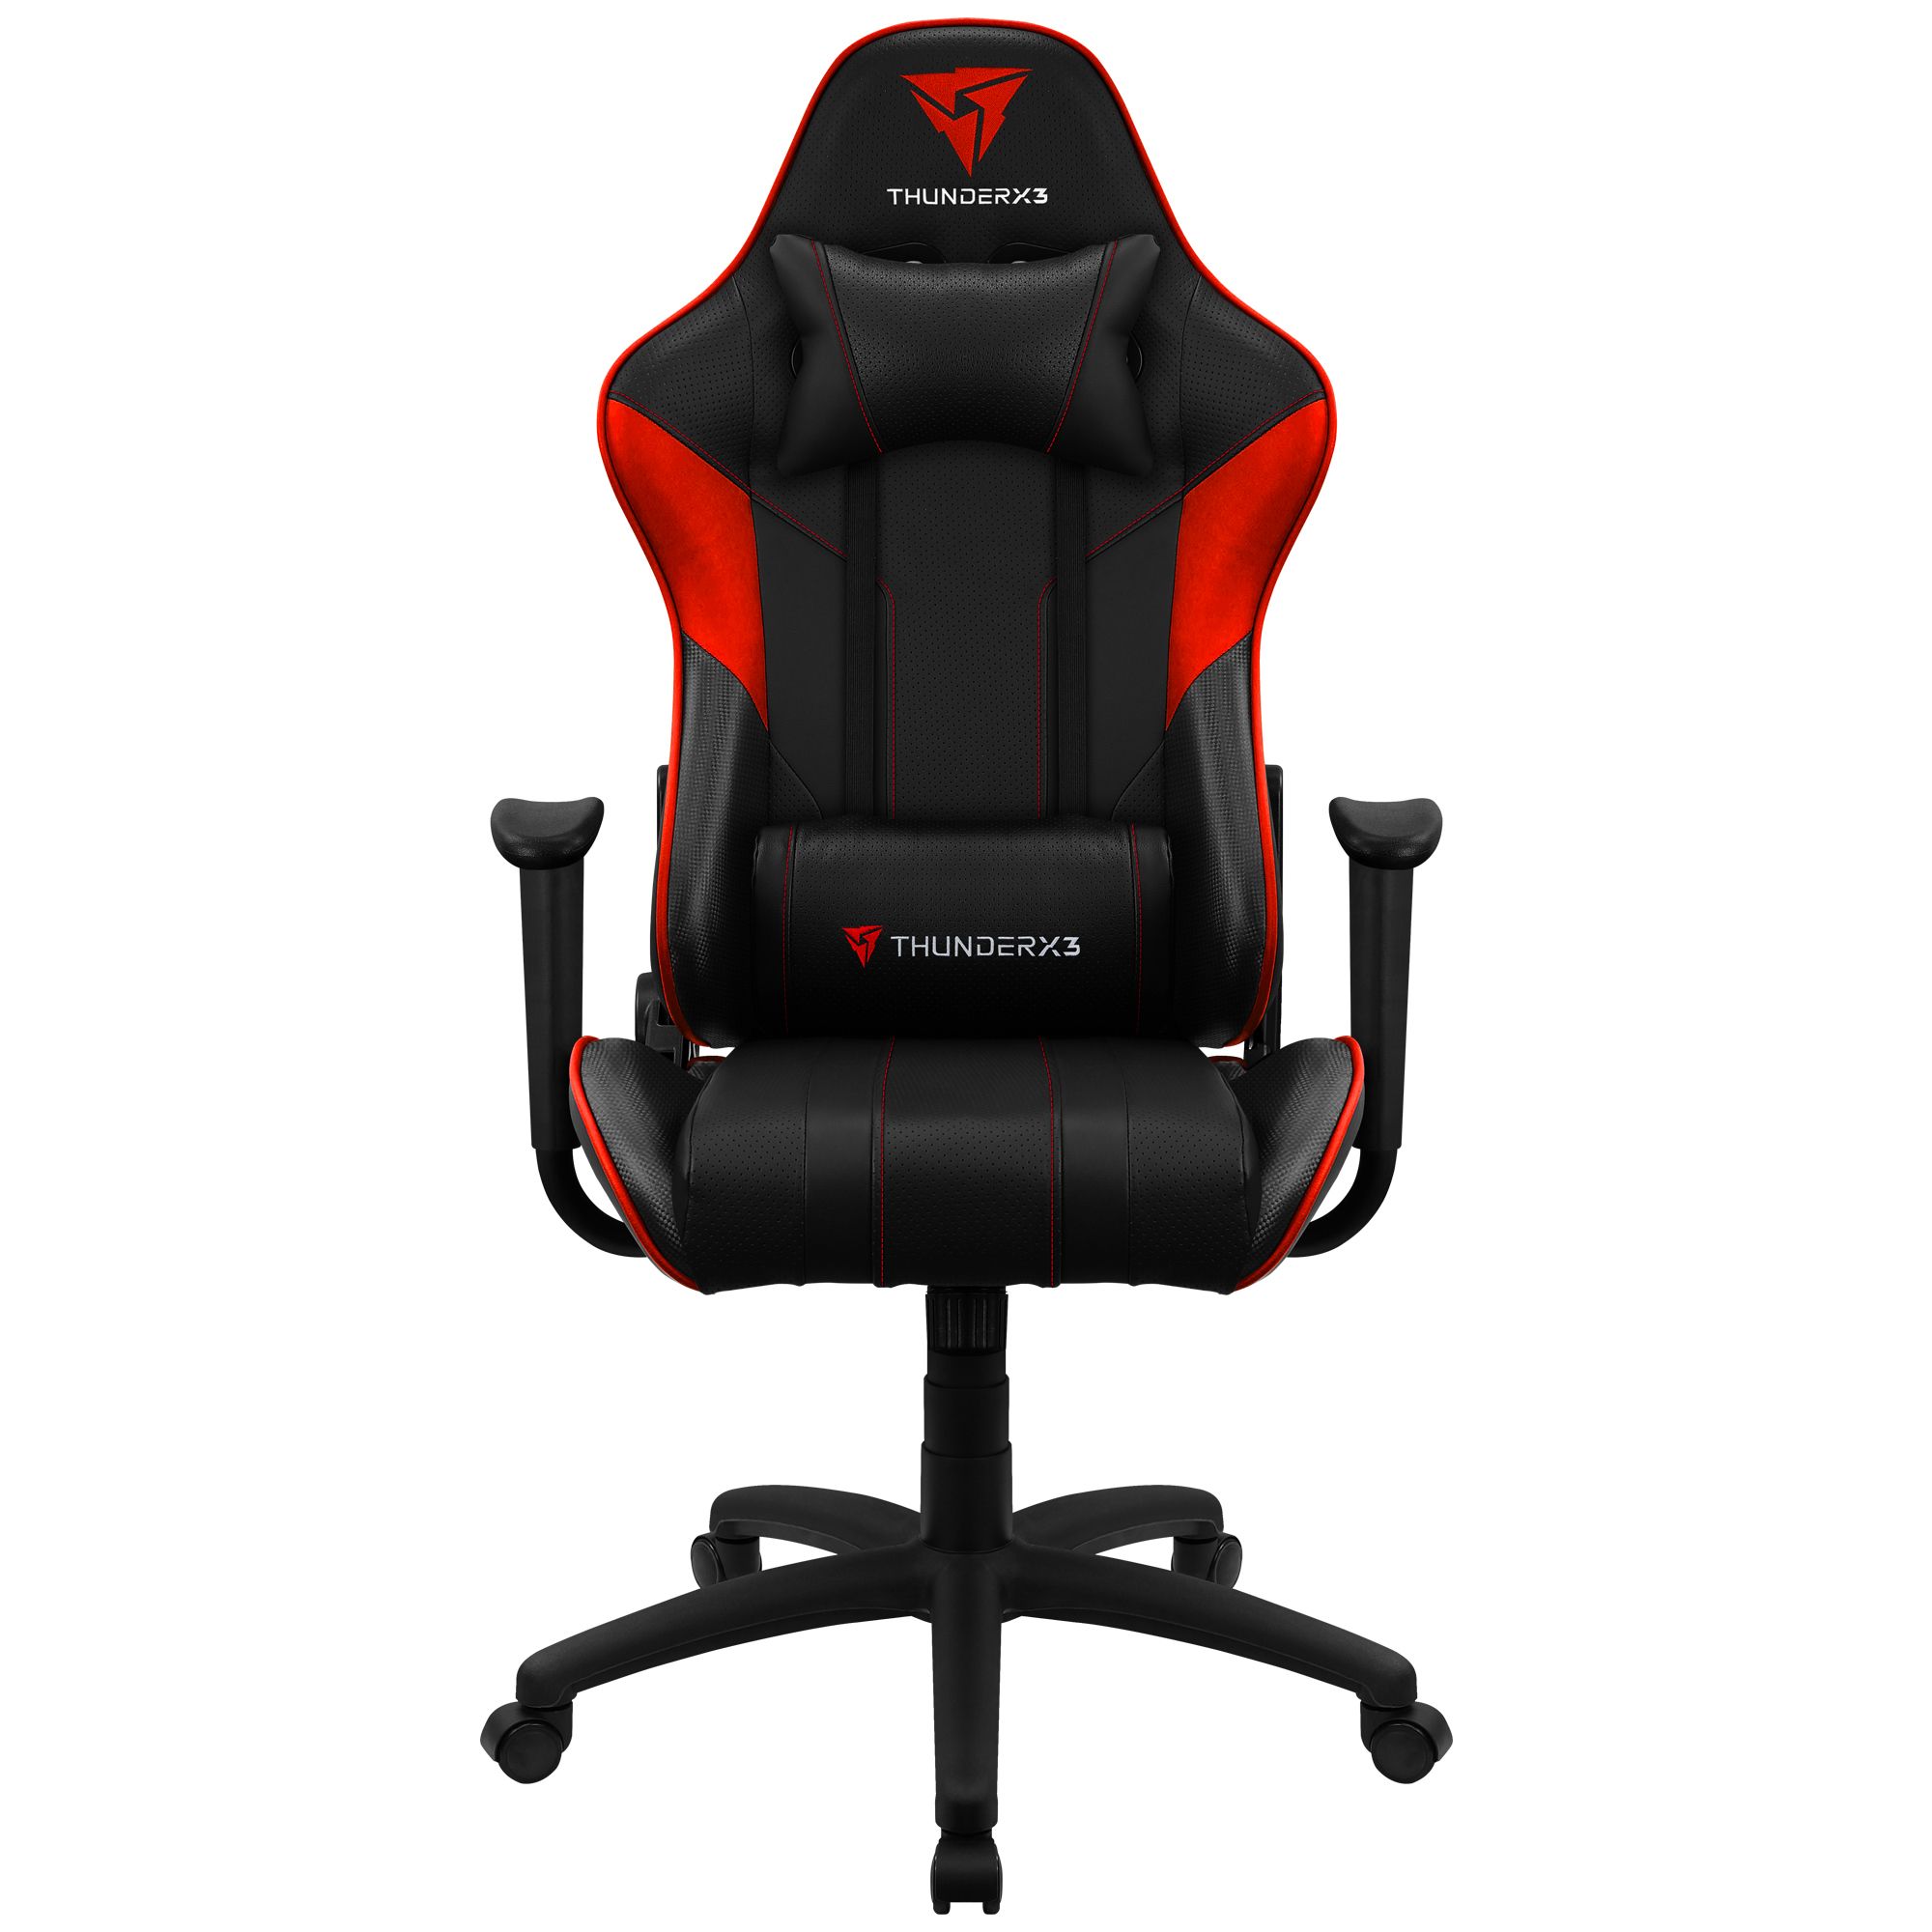 ThunderX3 EC3BR video game chair PC gaming chair Padded seat Black, Red_1